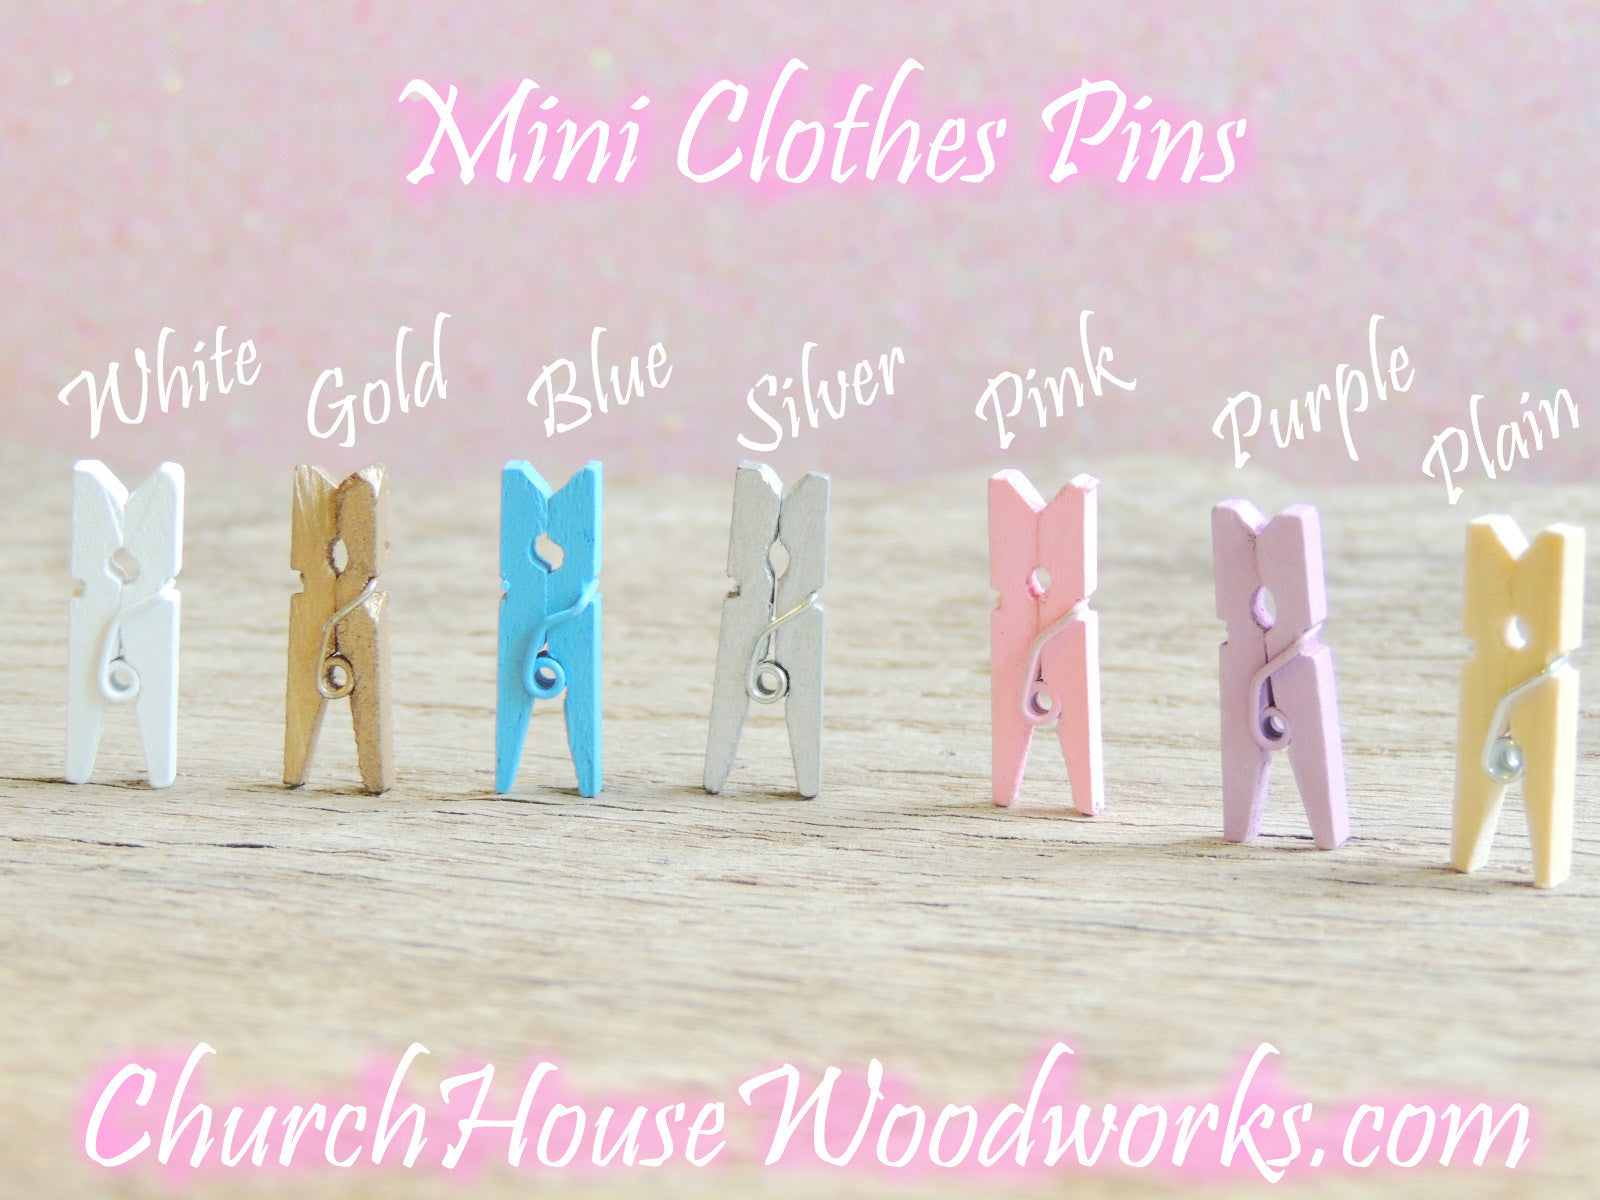 Pack of 100 Mini Silver Clothespins – Church House Woodworks